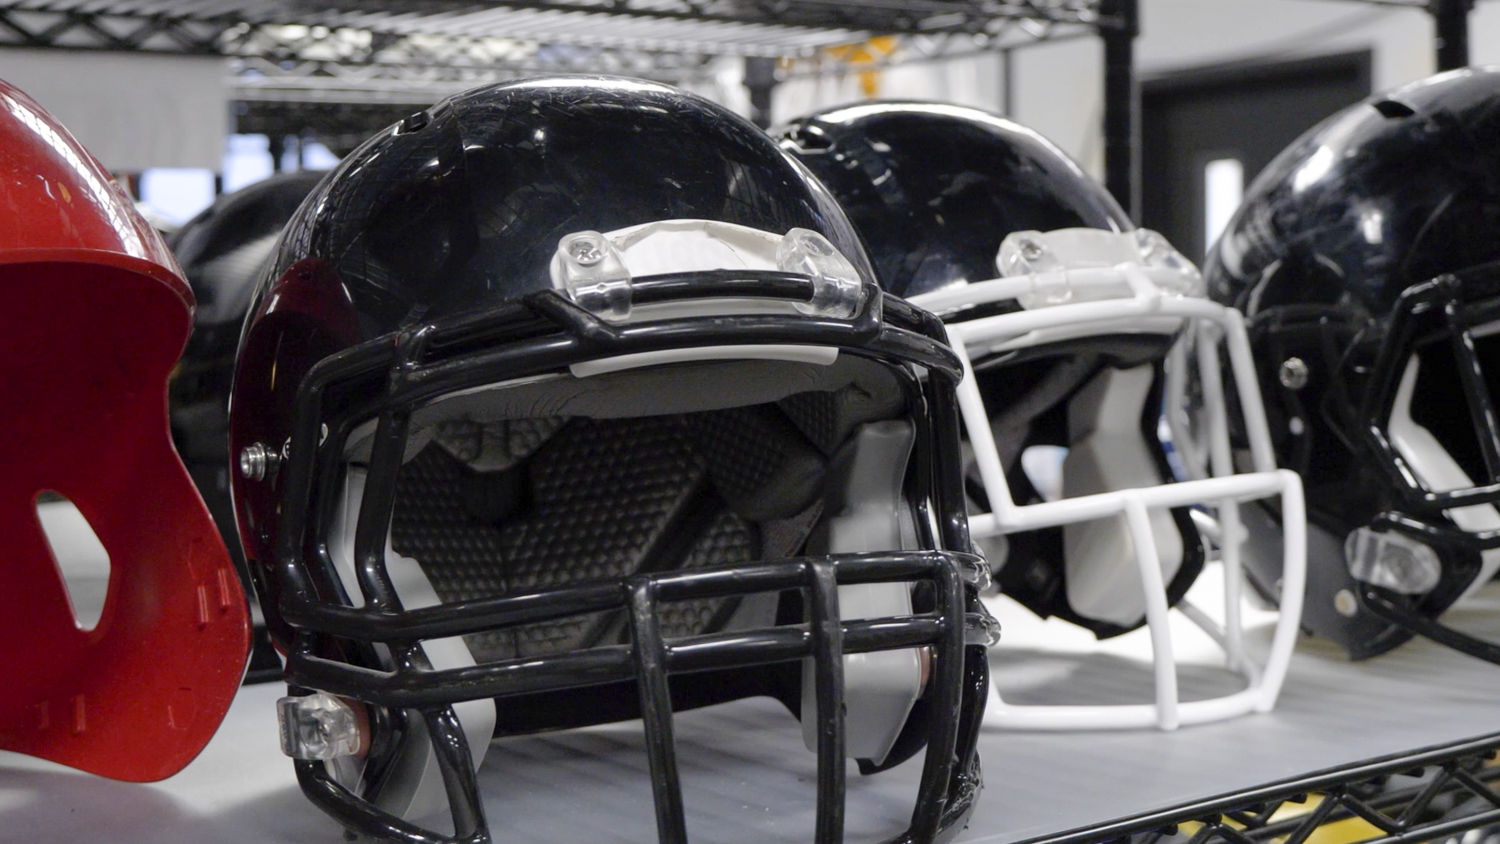 Vicis unveils revamped high-tech helmet under new ownership following  tumultuous startup journey – GeekWire